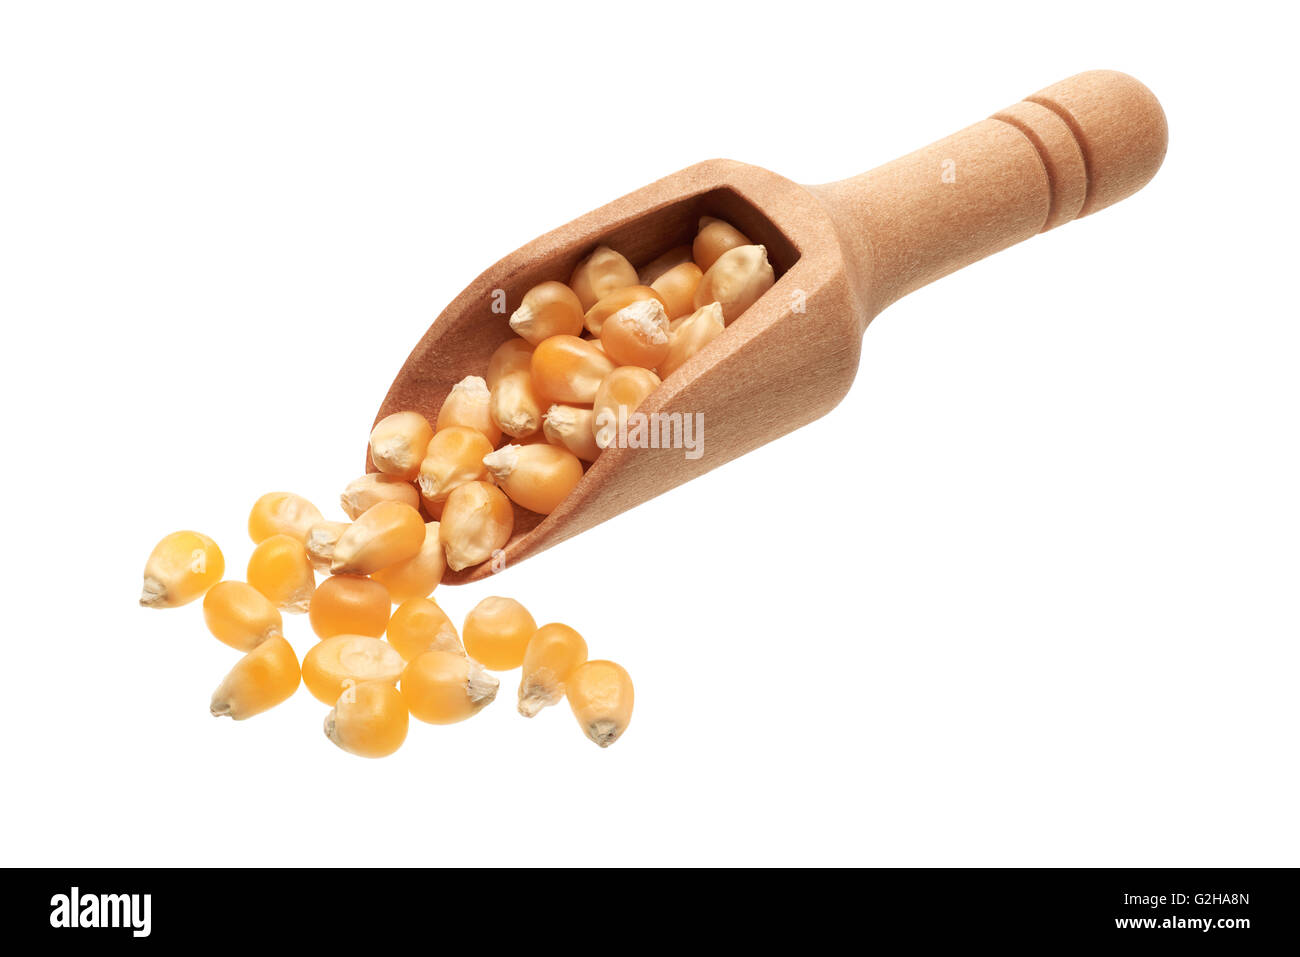 Food ingredients: heap of dried corn seeds in a wooden scoop, on white background Stock Photo